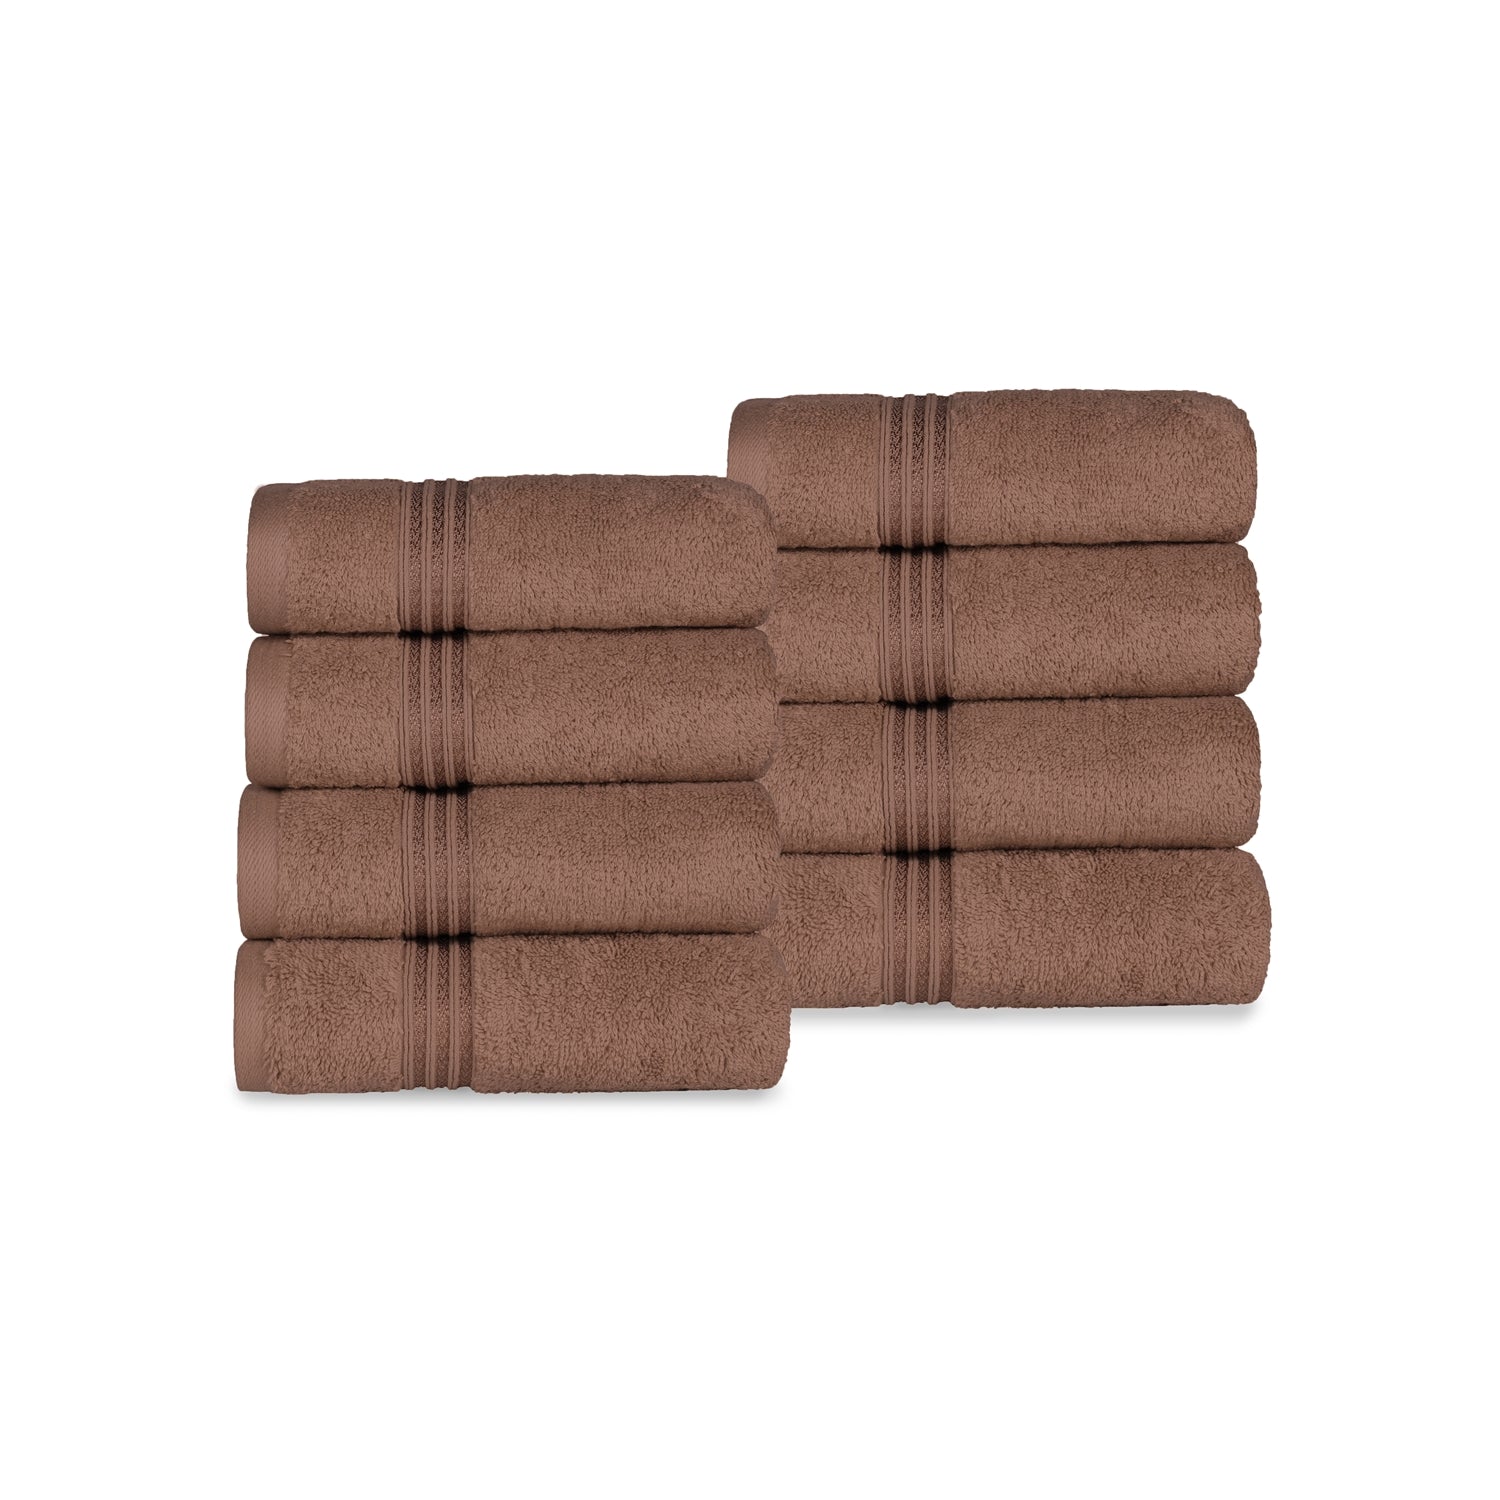 Egyptian Cotton Highly Absorbent Solid Ultra Soft Towel Set - Mocha